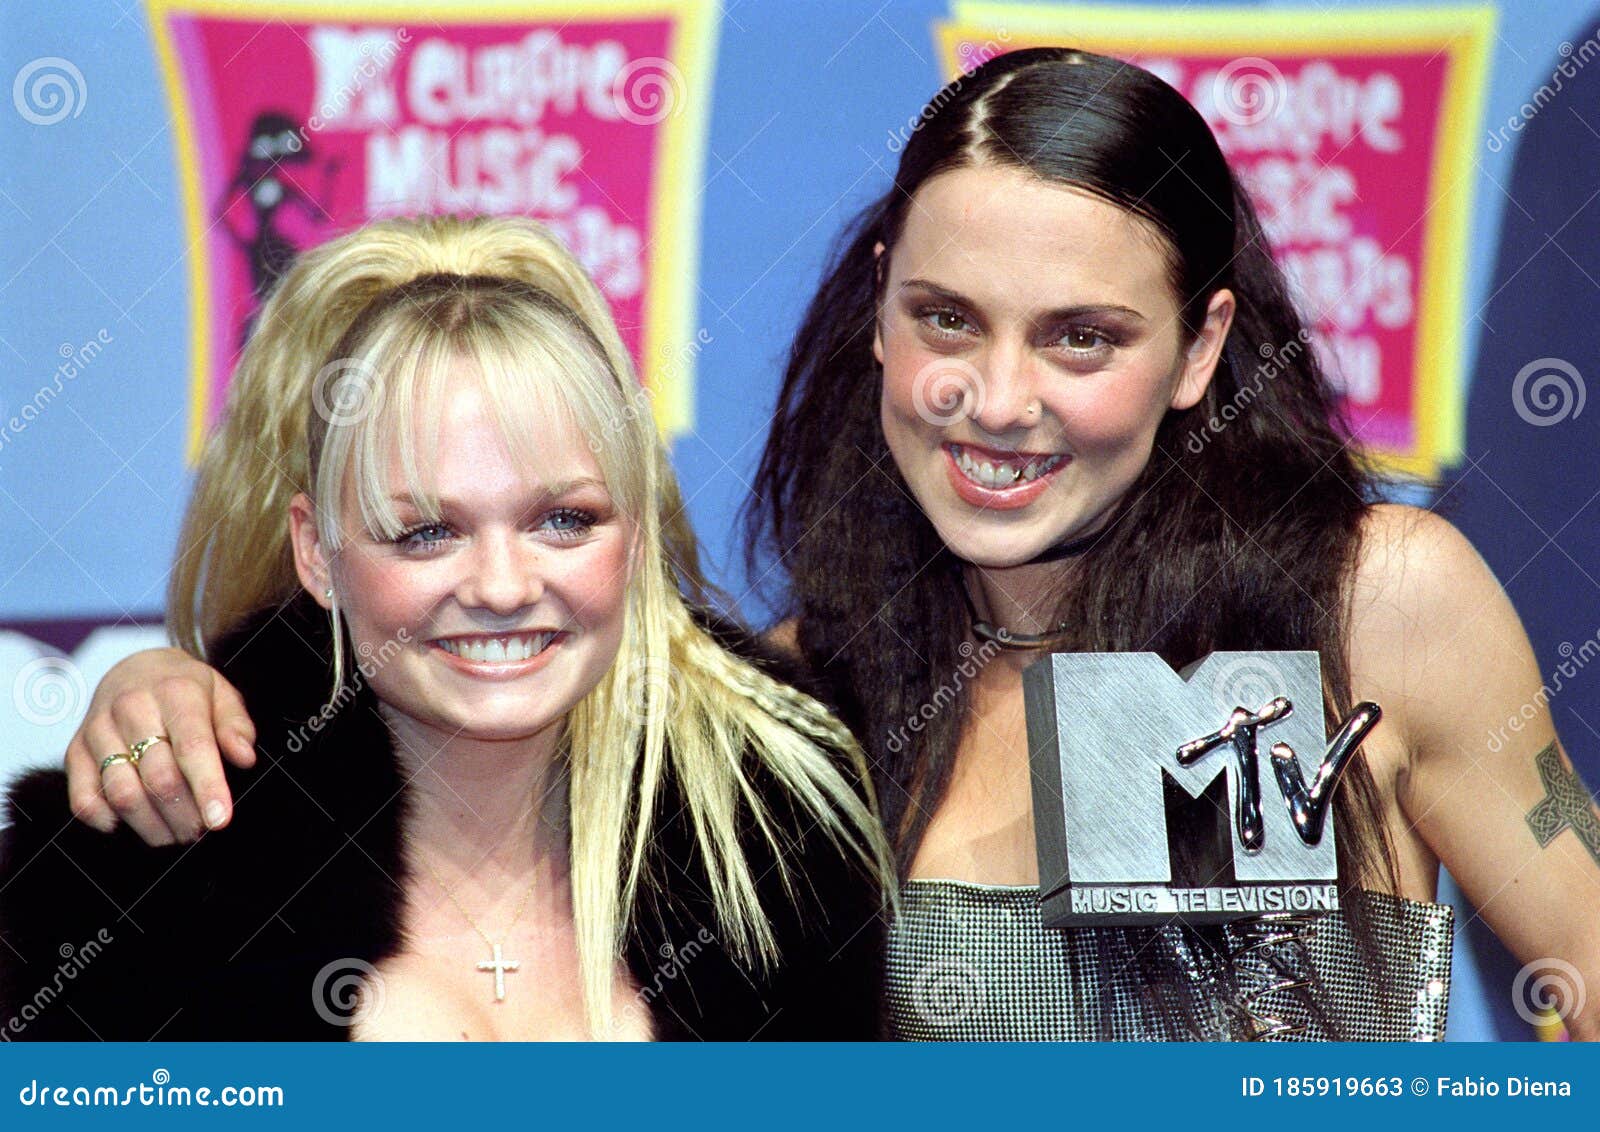 Spice Girls Emma Bunton And Melanie Chisholm After The Awards Ceremony Pose With The Trophy Won Editorial Stock Photo Image Of Concert Brown